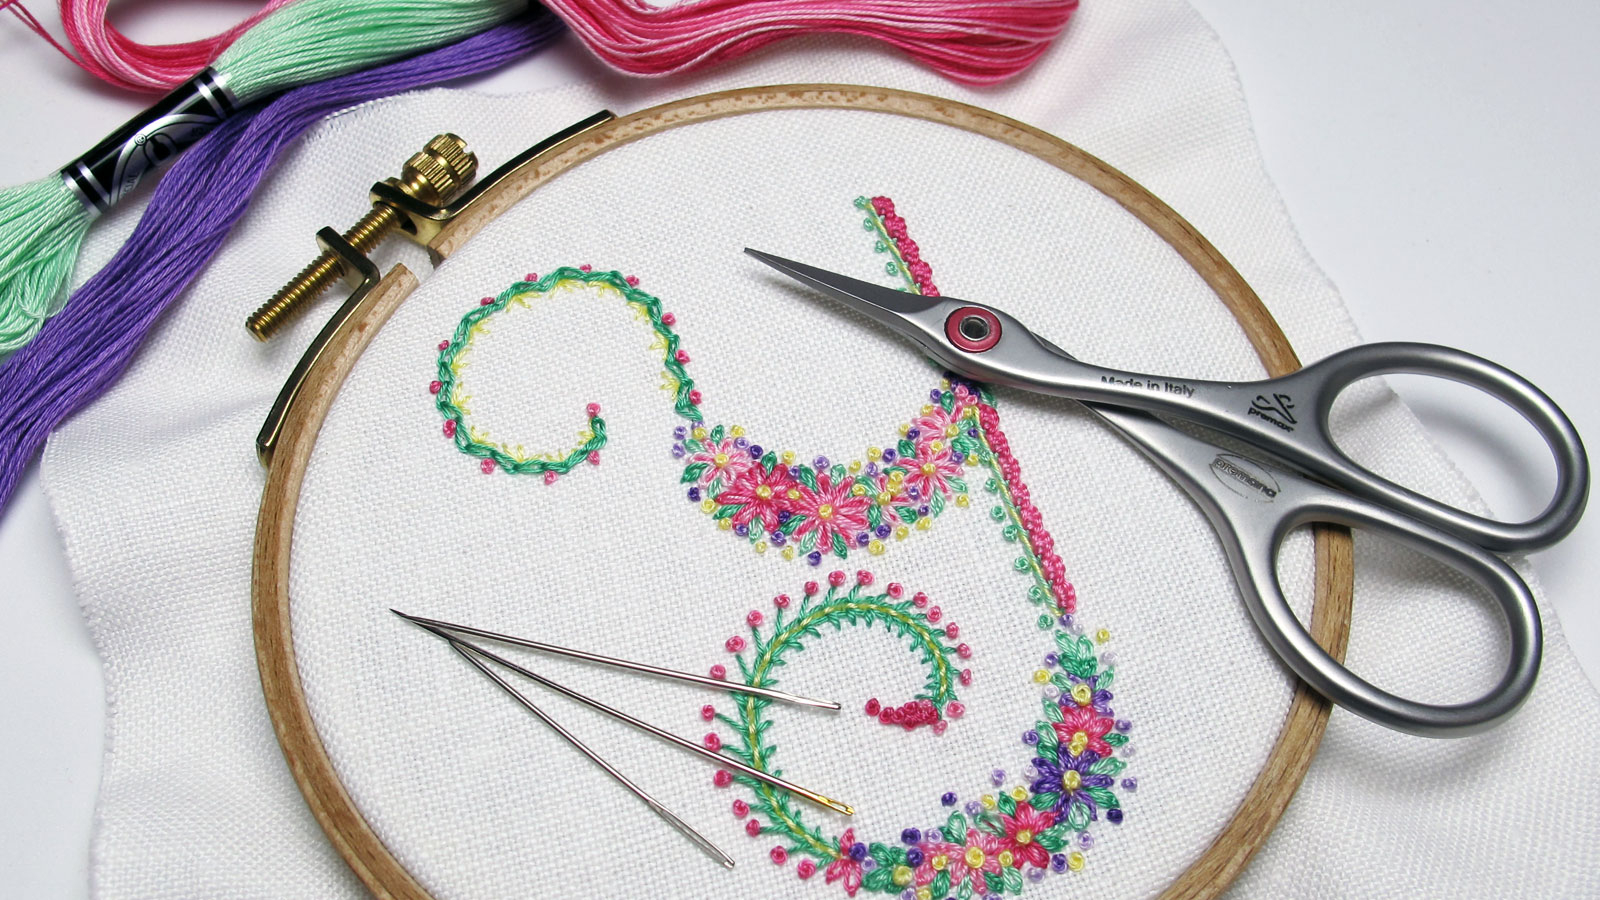 Bead Embroidery Patterns Free Download Needlenthread Tips Tricks And Great Resources For Hand Embroidery